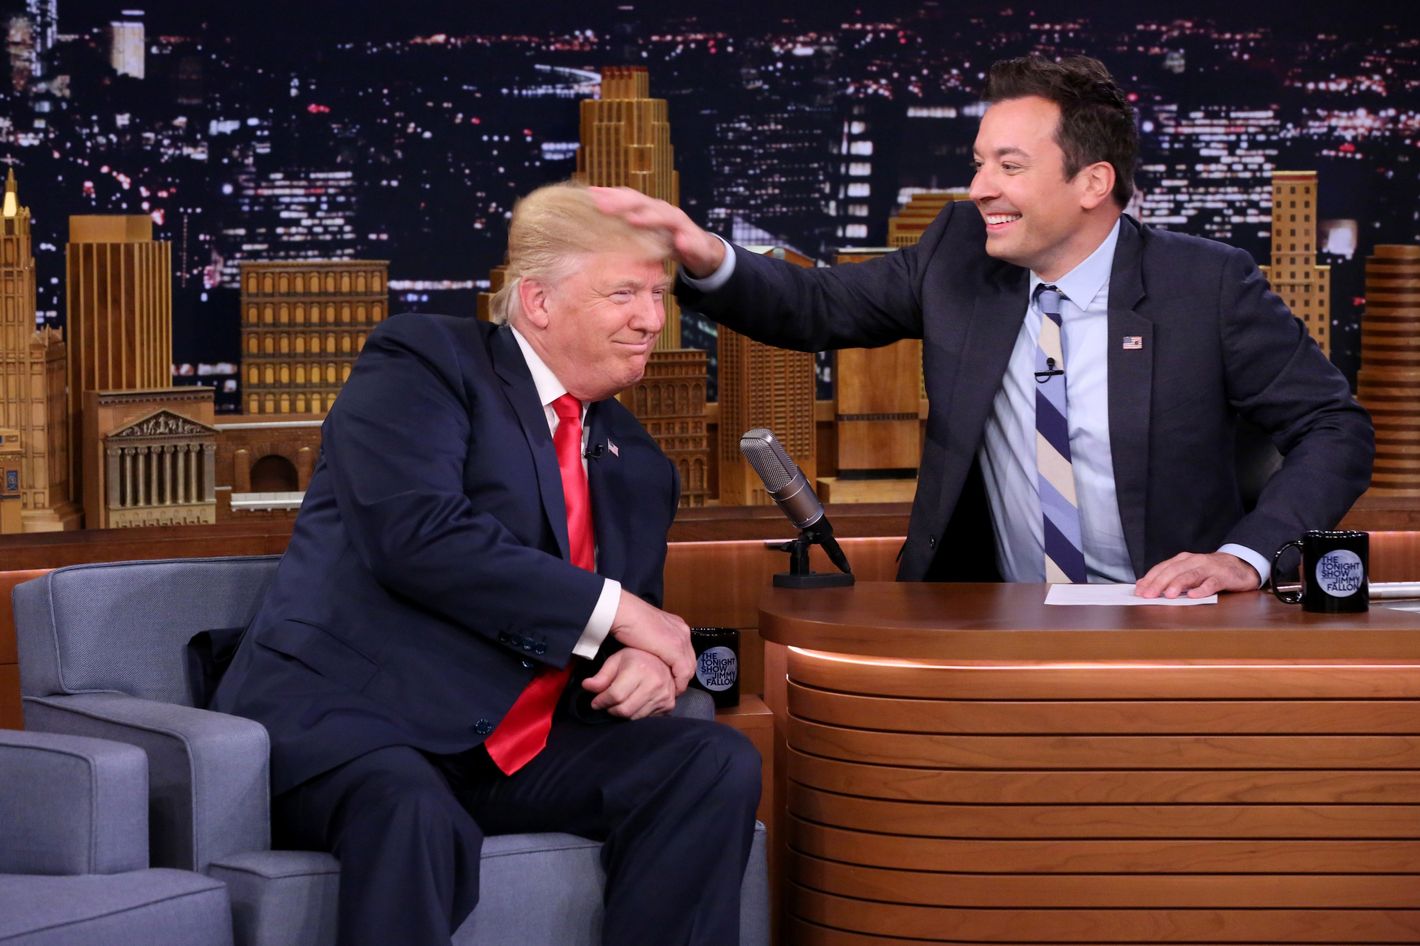 Who's the real king of late night: Jimmy Fallon or Stephen Colbert?